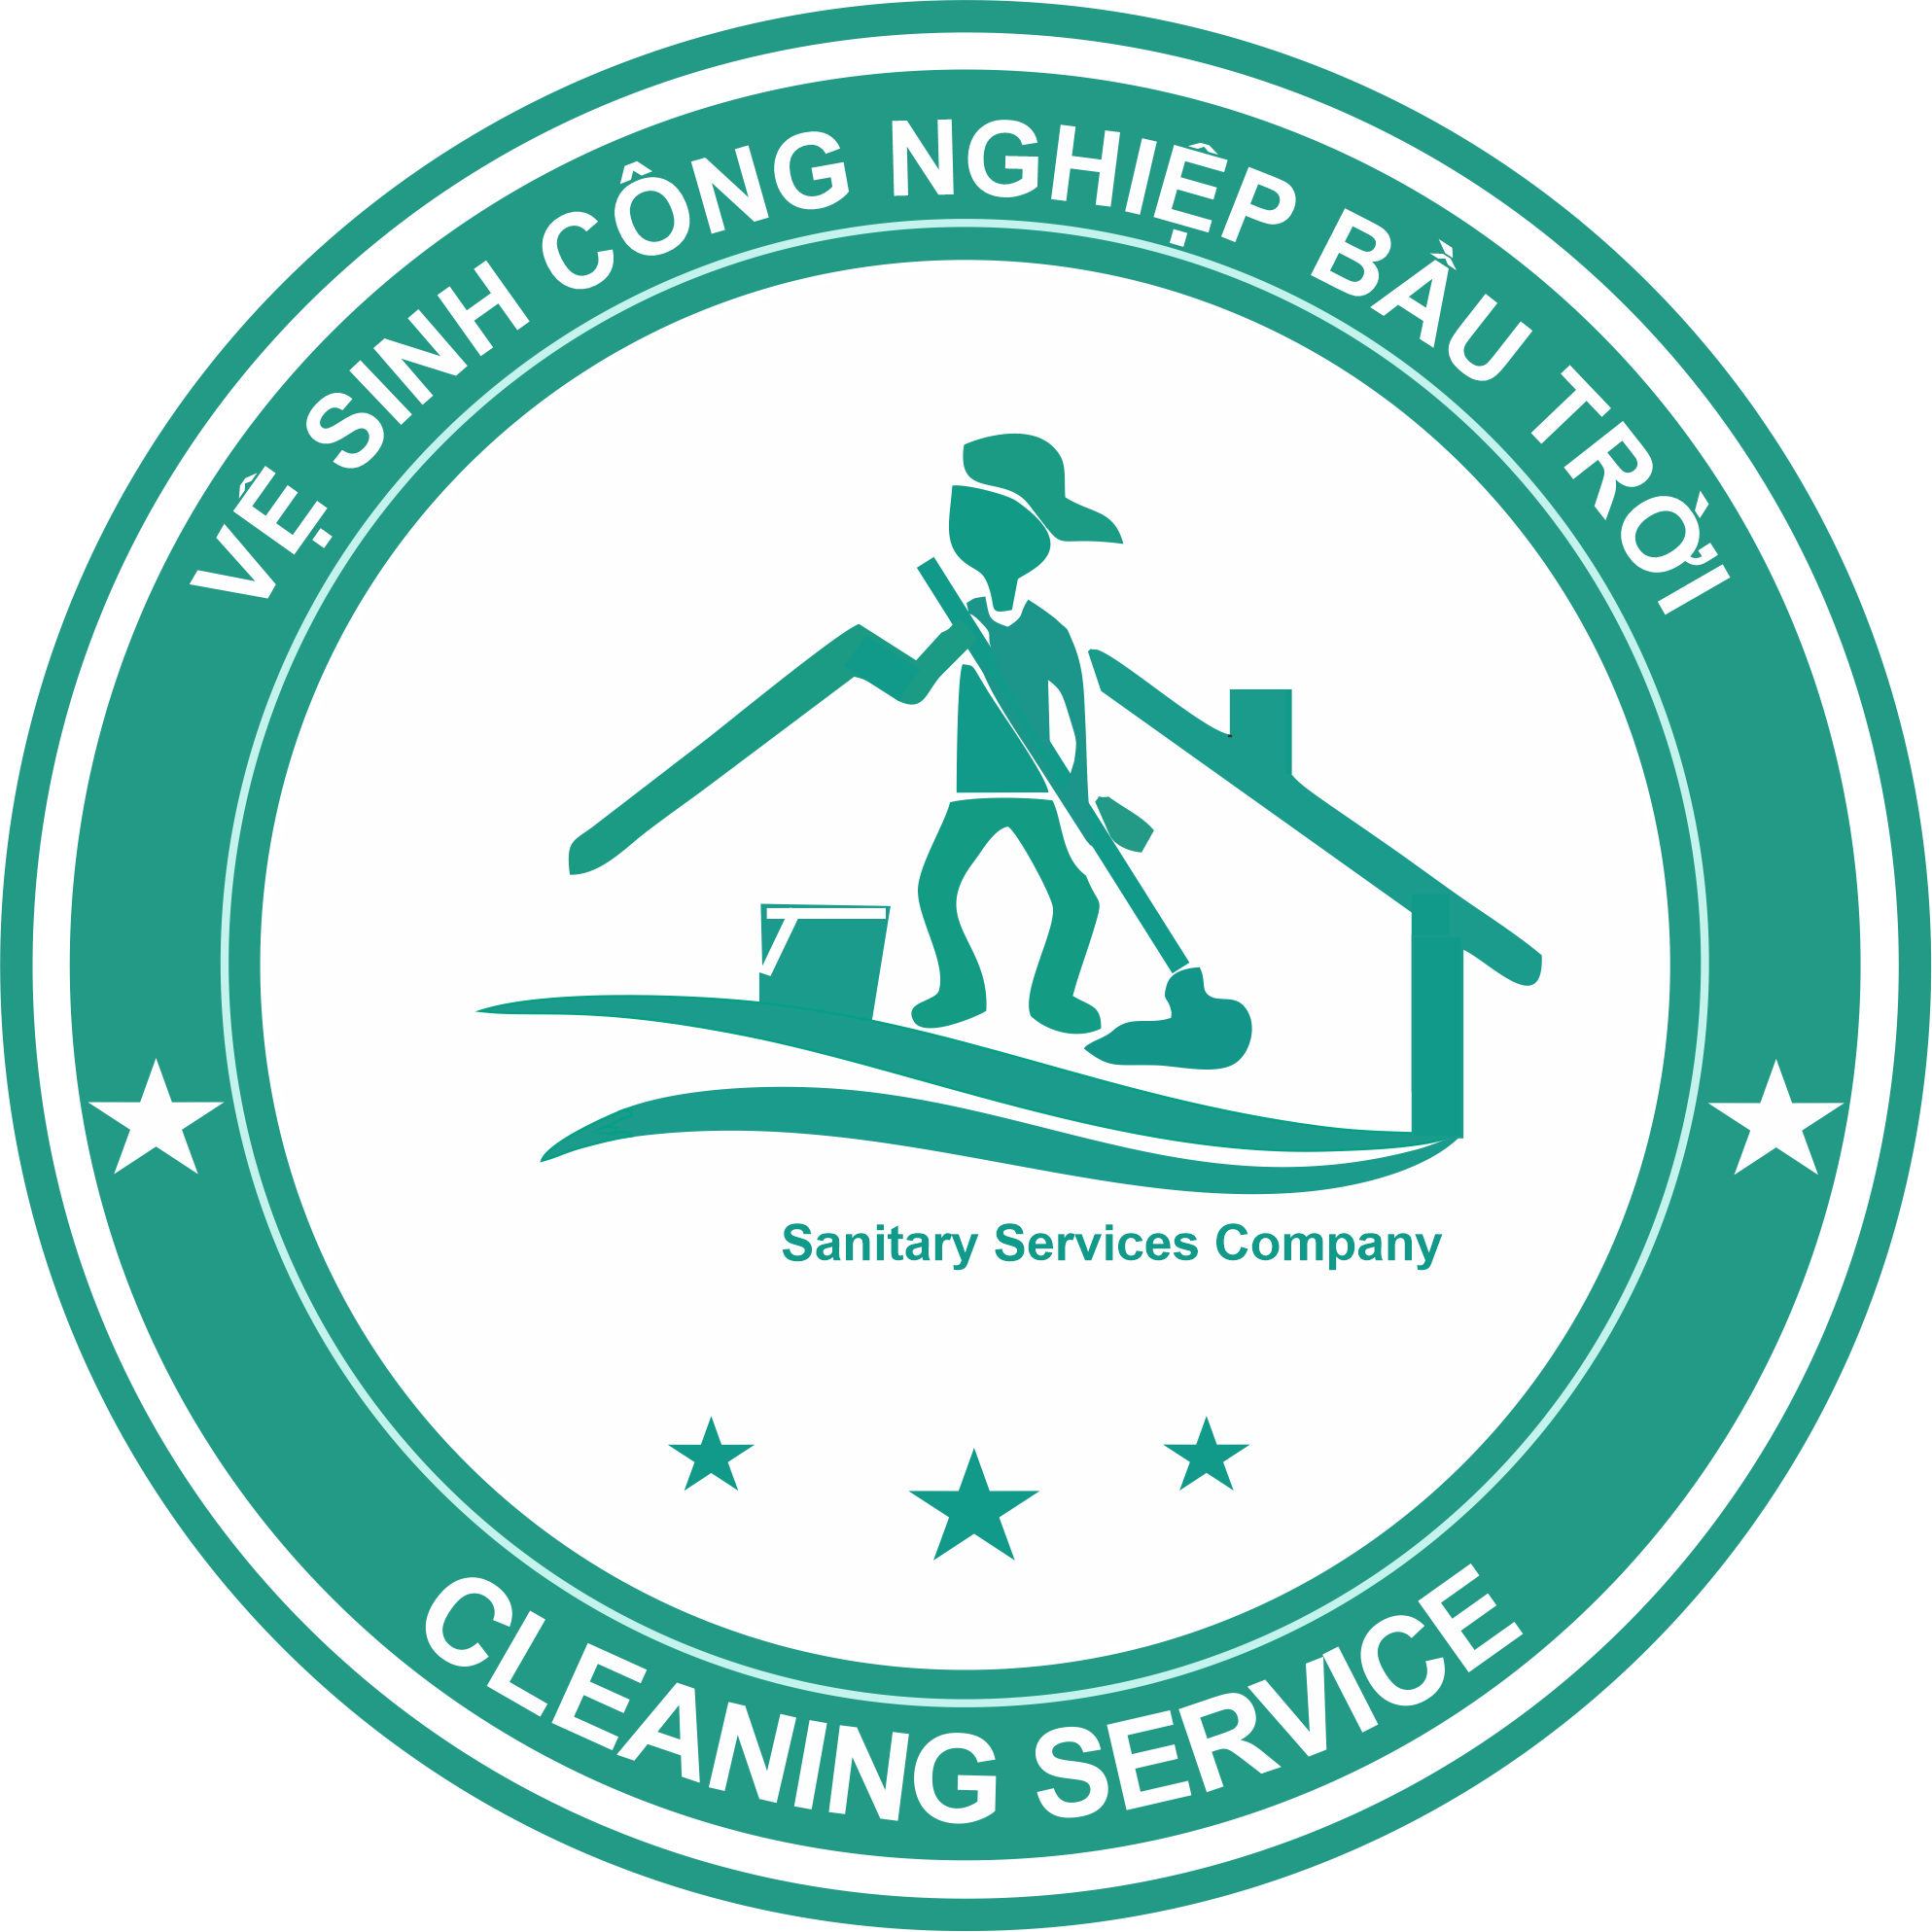 Ve-sinh-cong-nghiep-gia-re-SKY-Cleaning-services